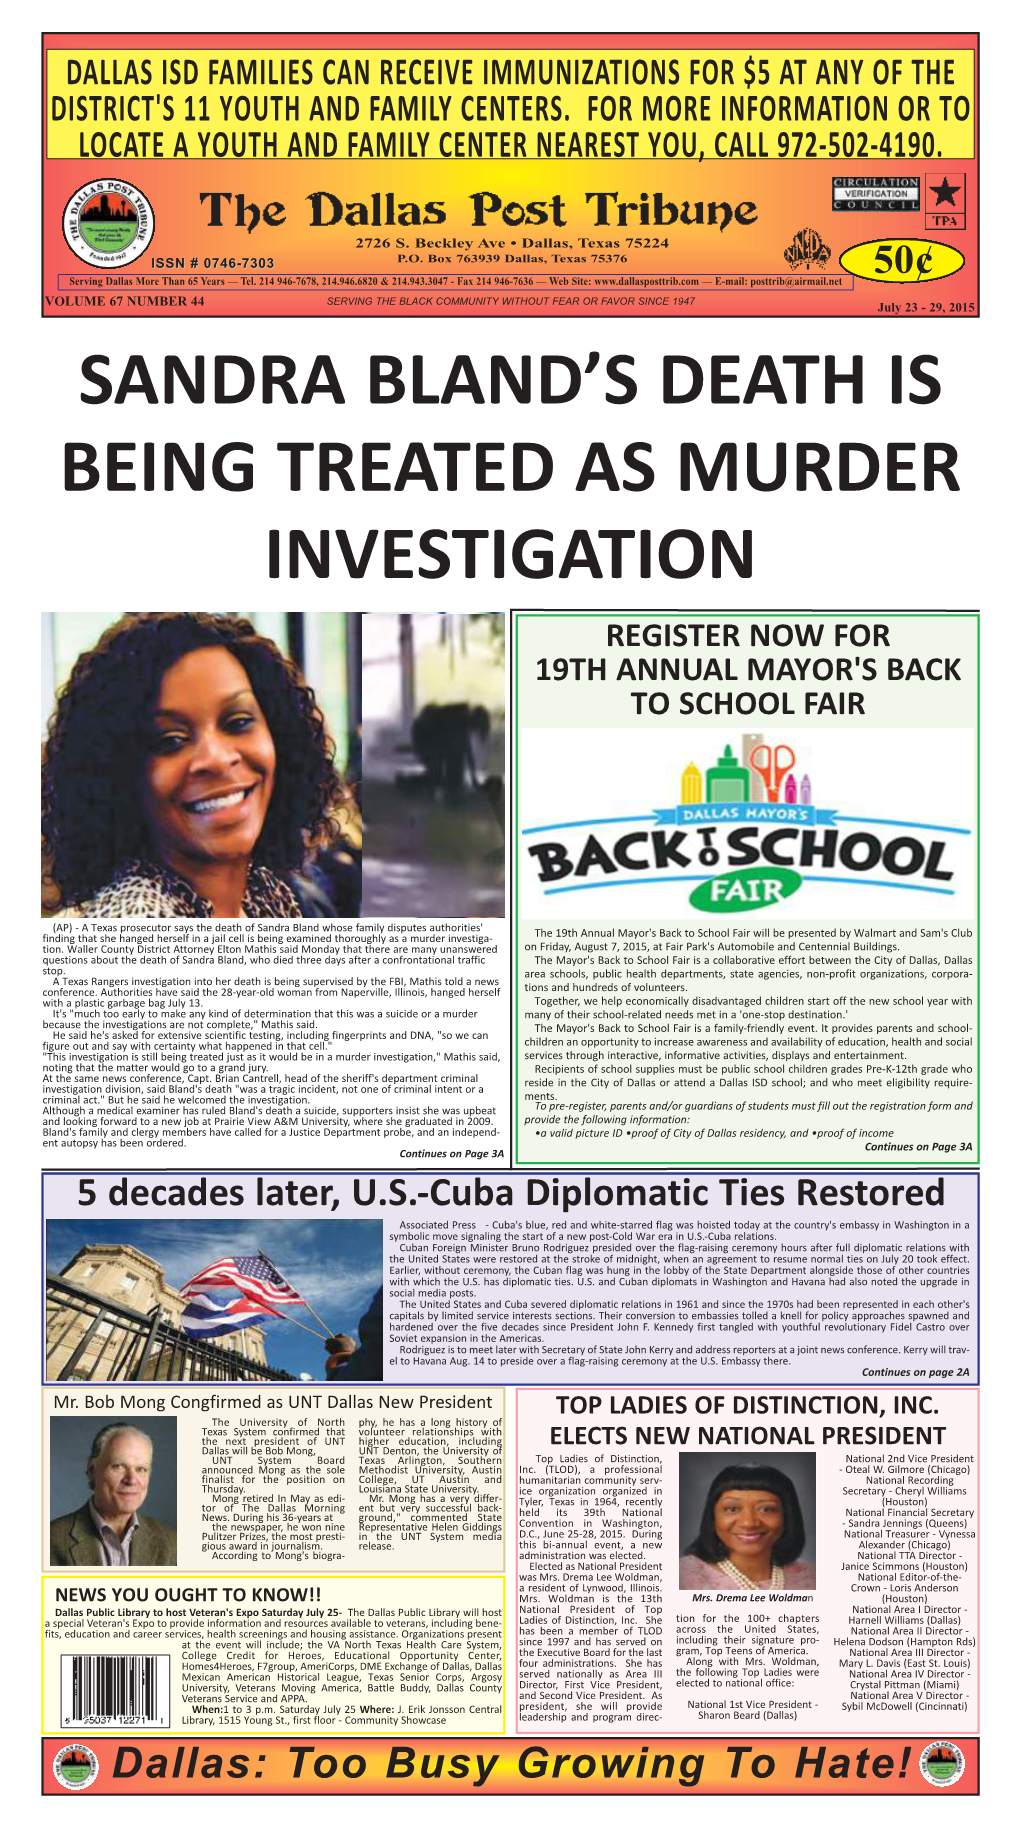 July 23 - 29, 2015 SANDRA BLAND’S DEATH IS BEING TREATED AS MURDER INVESTIGATION REGISTER NOW for 19TH ANNUAL MAYOR's BACK to SCHOOL FAIR